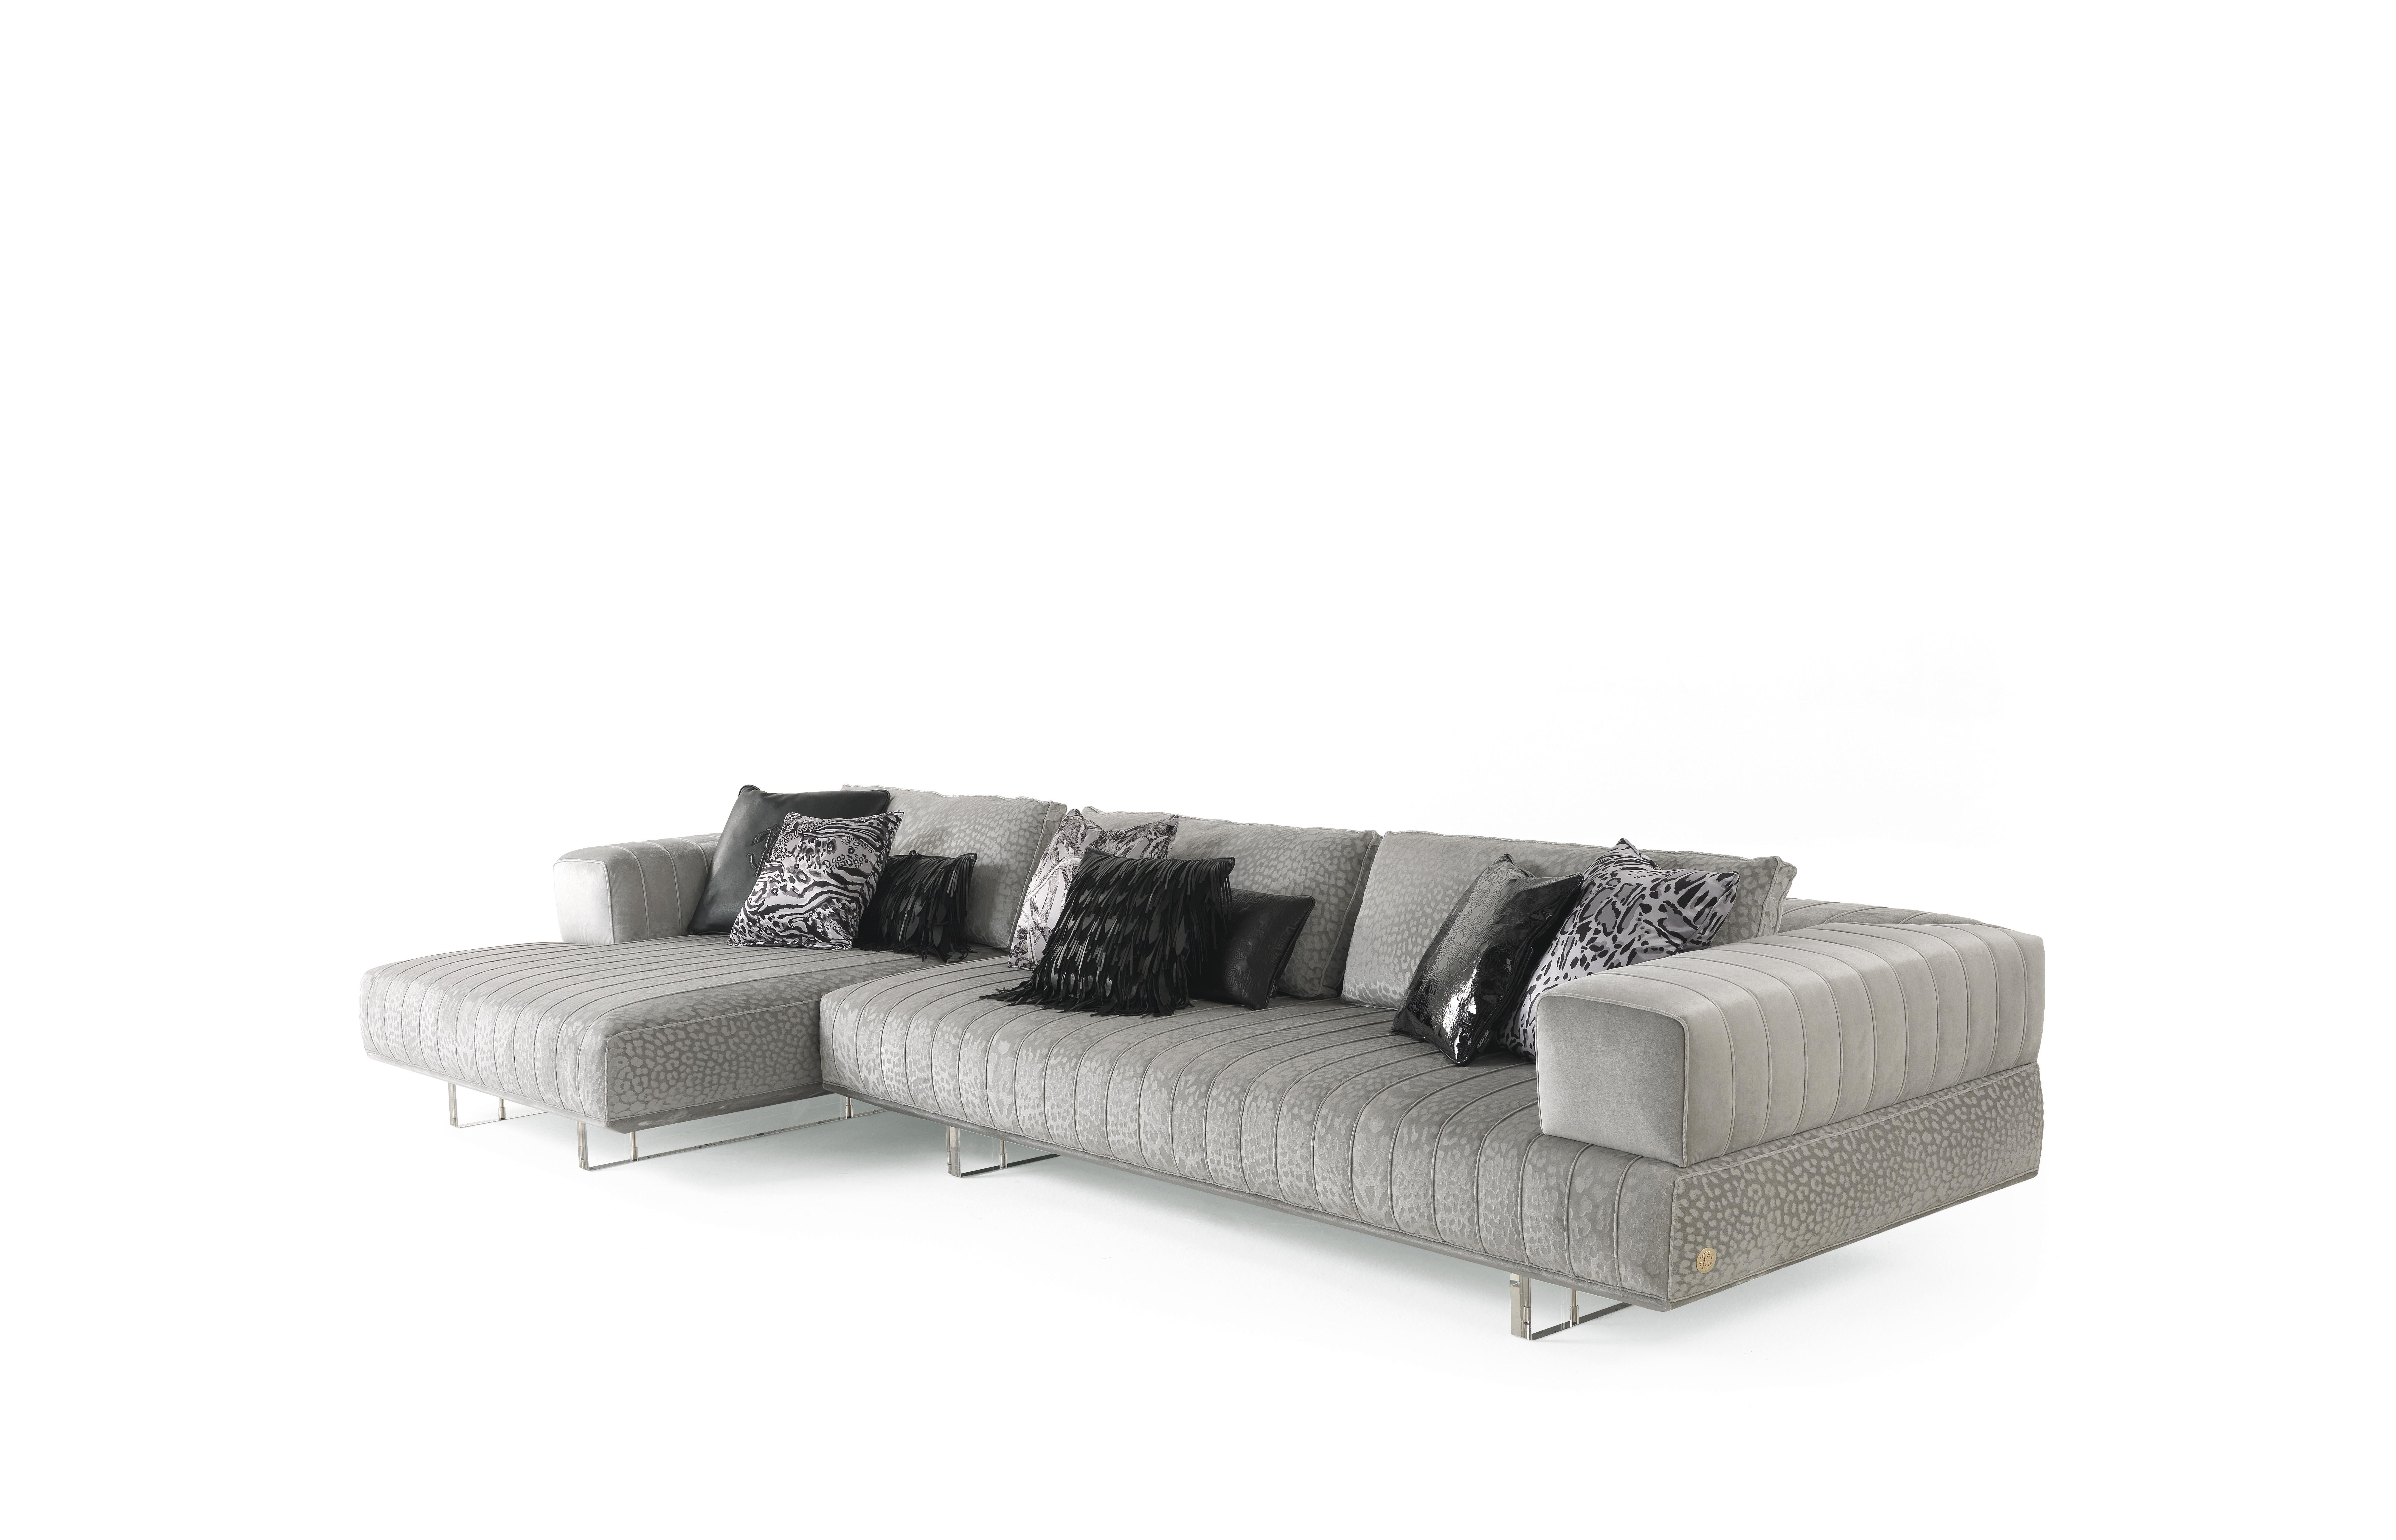 Contemporary lines and vintage references for the Aruba sofa, available in 2 or 3-seater versions or modular according to customer needs. The light legs in
transparent plexiglass gives the sofa a touch of 70s style while the processing of the